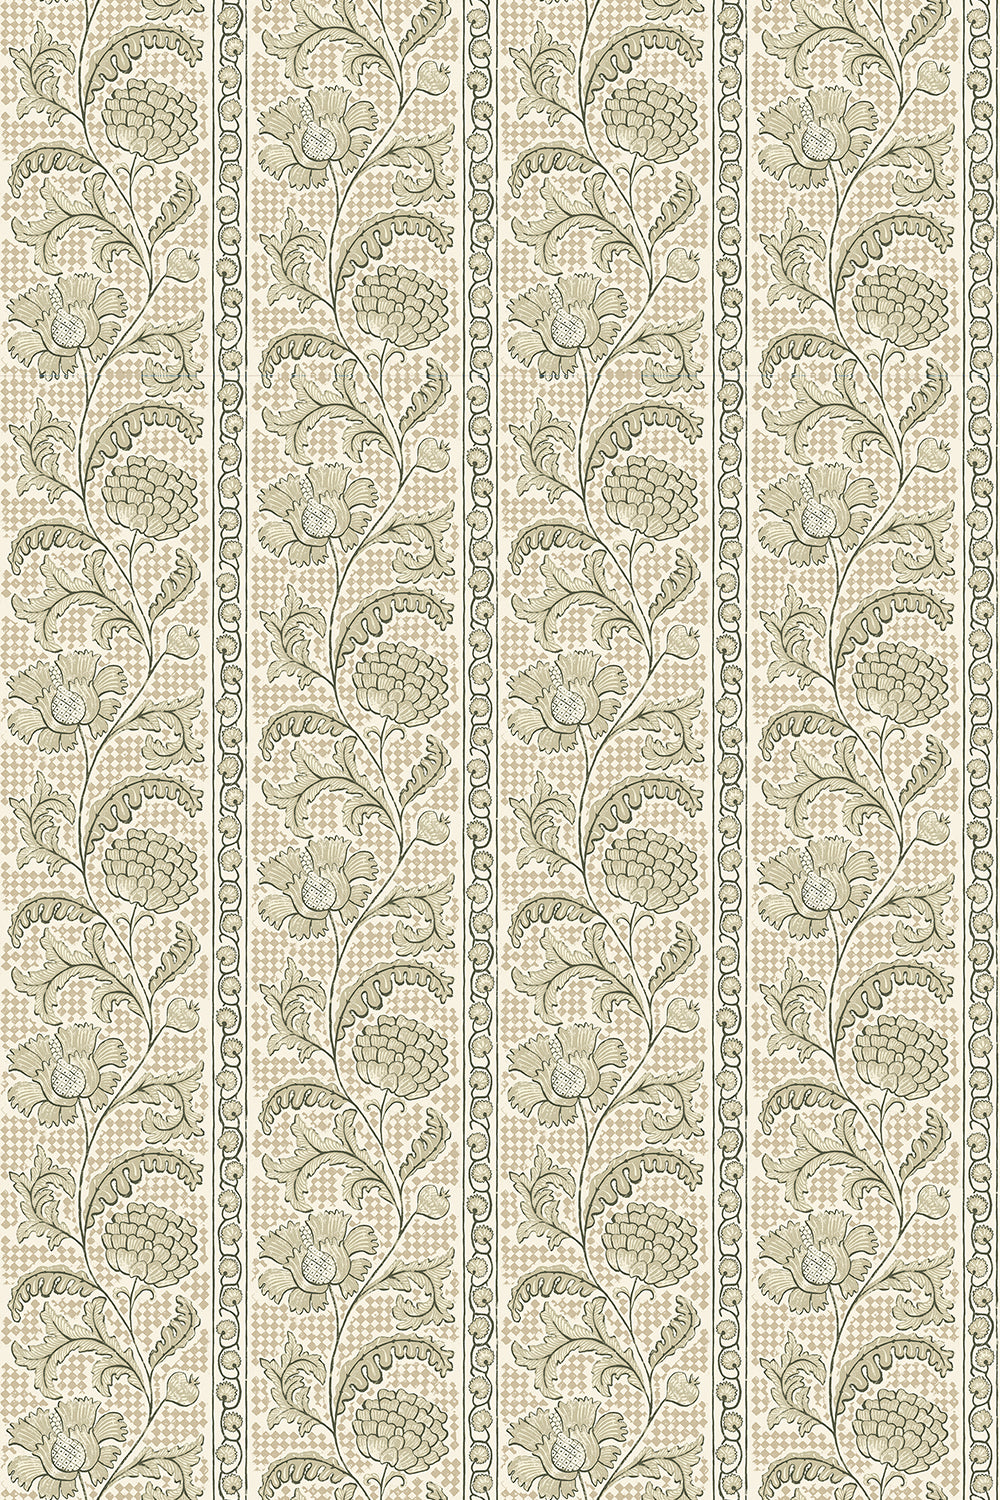 Josephine-Munsey-Floral-Check-Wallpaper-Maitland-Green-Cotswold-white-trailing-florals-against-check-background-stripes-floral-traditional-hand-drawn-illustration-printed-British-Designer